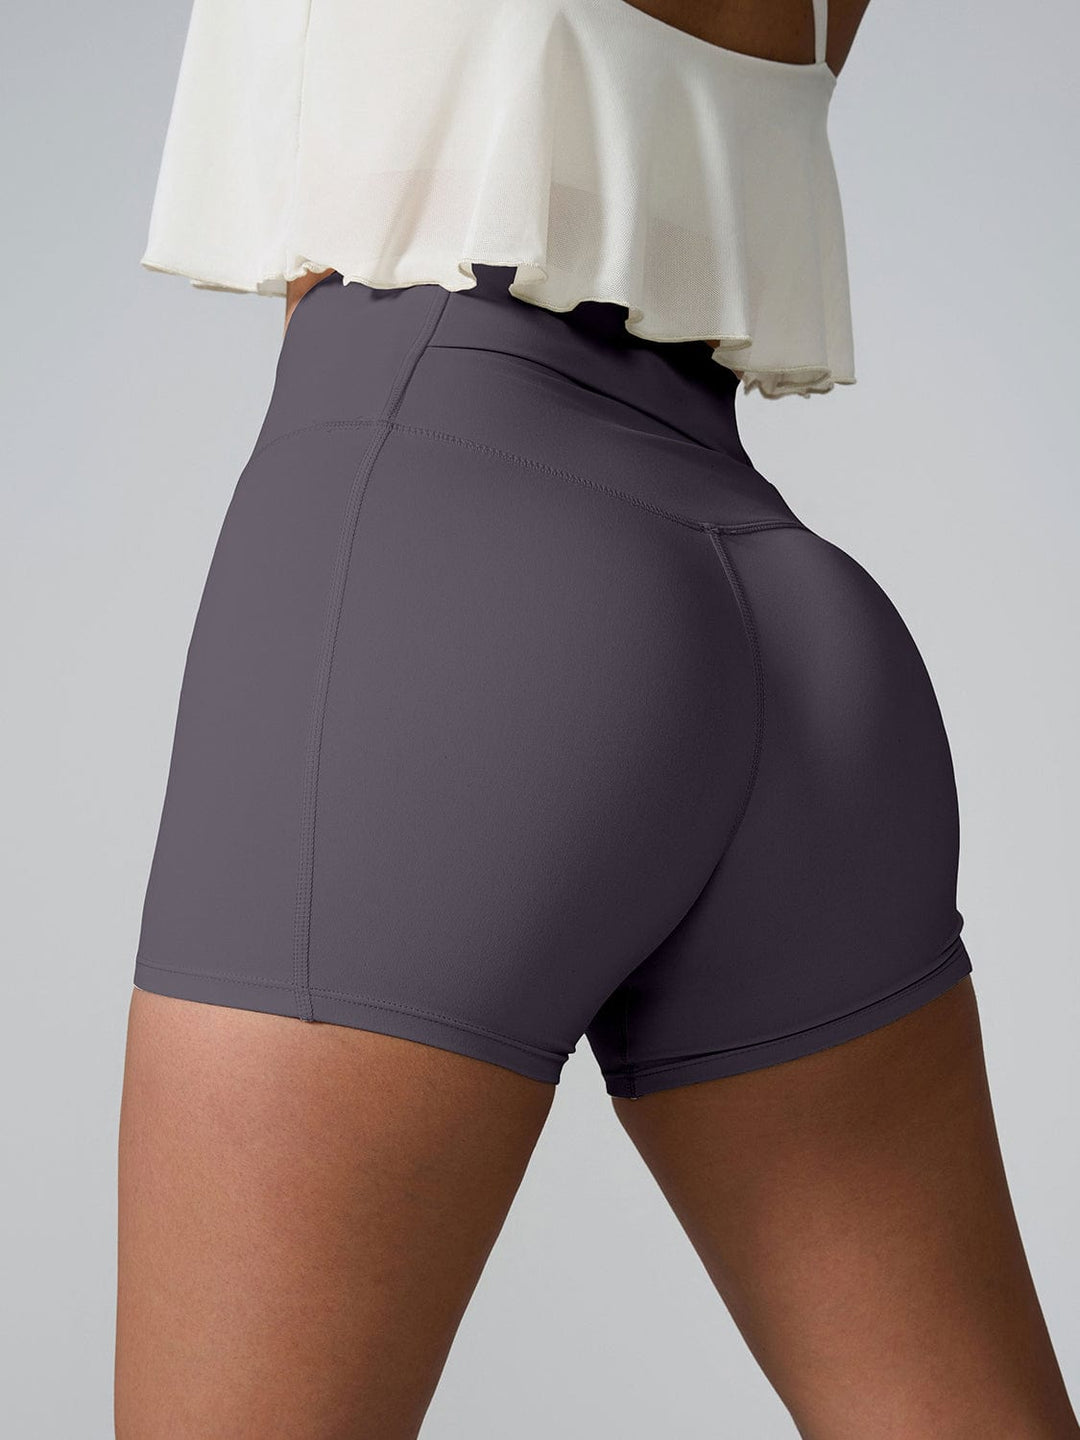 The802Gypsy Activewear/bottoms GYPSY-High Waist Active Shorts